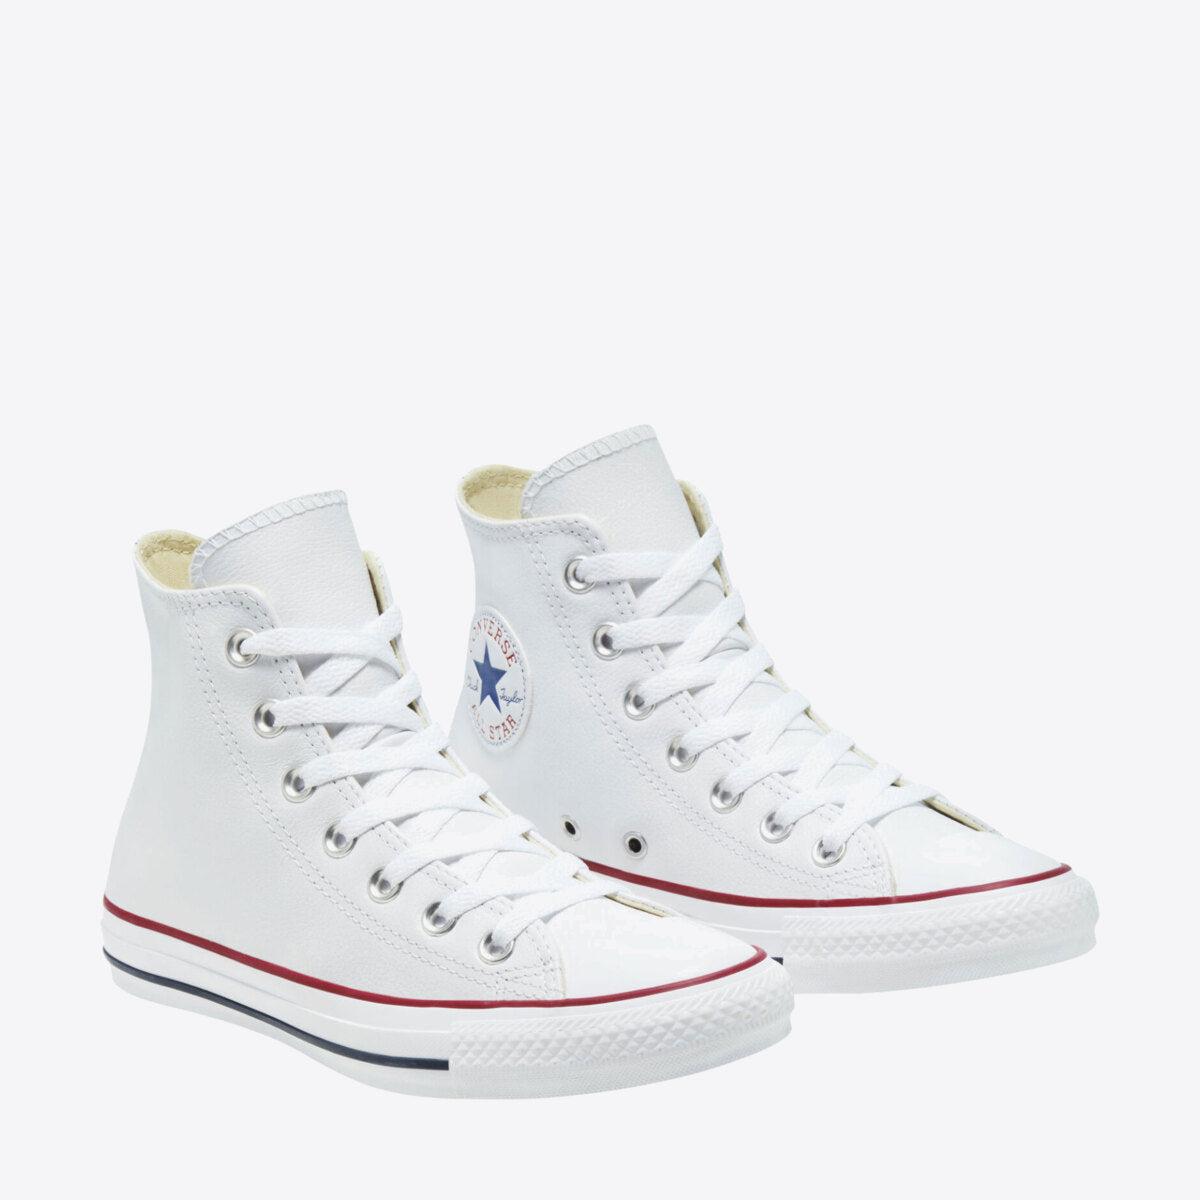 CONVERSE Chuck Taylor All Star Leather High White - Image 3